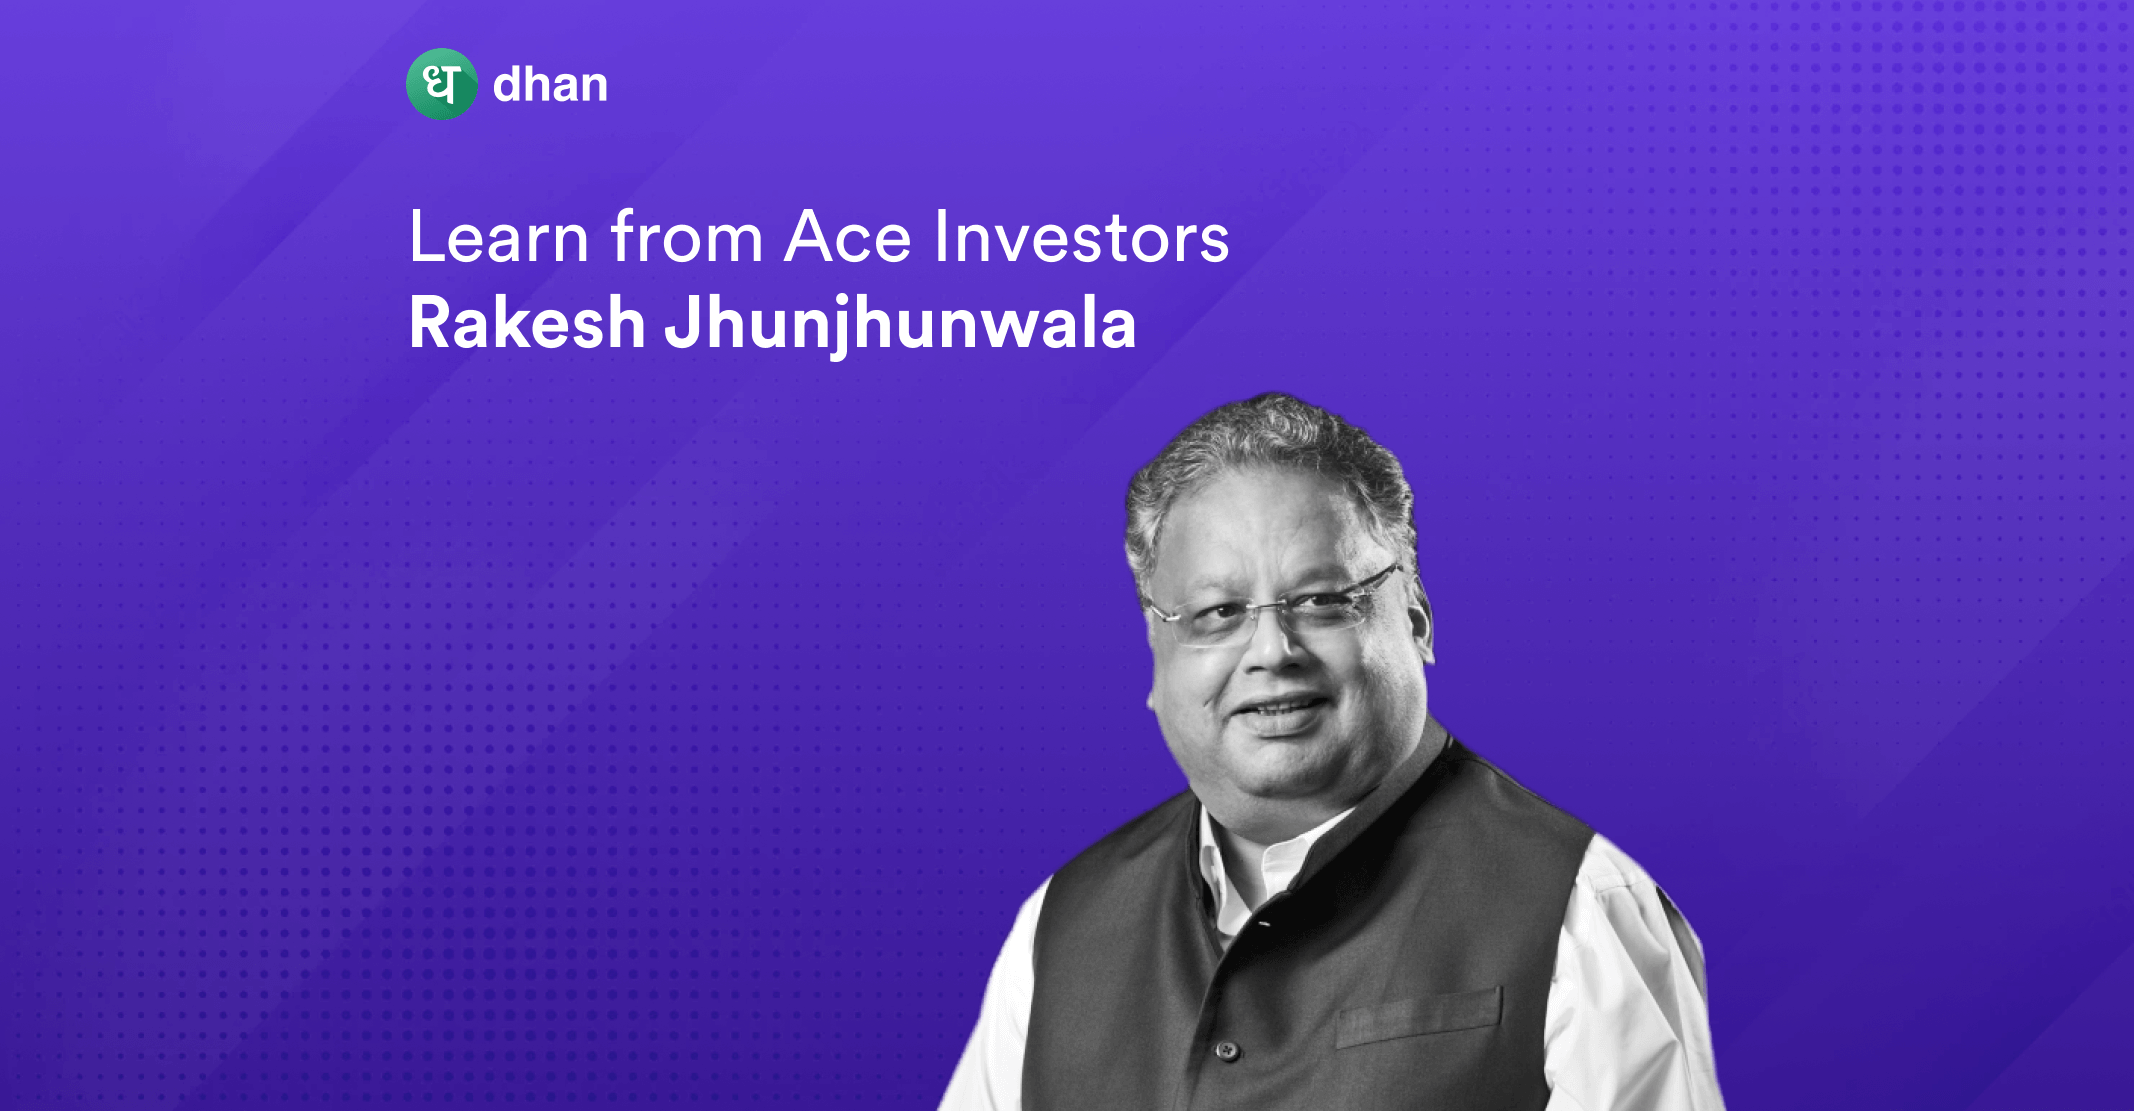 Rakesh Jhunjhunwala Investment Strategy - Learn from the Ace Investor